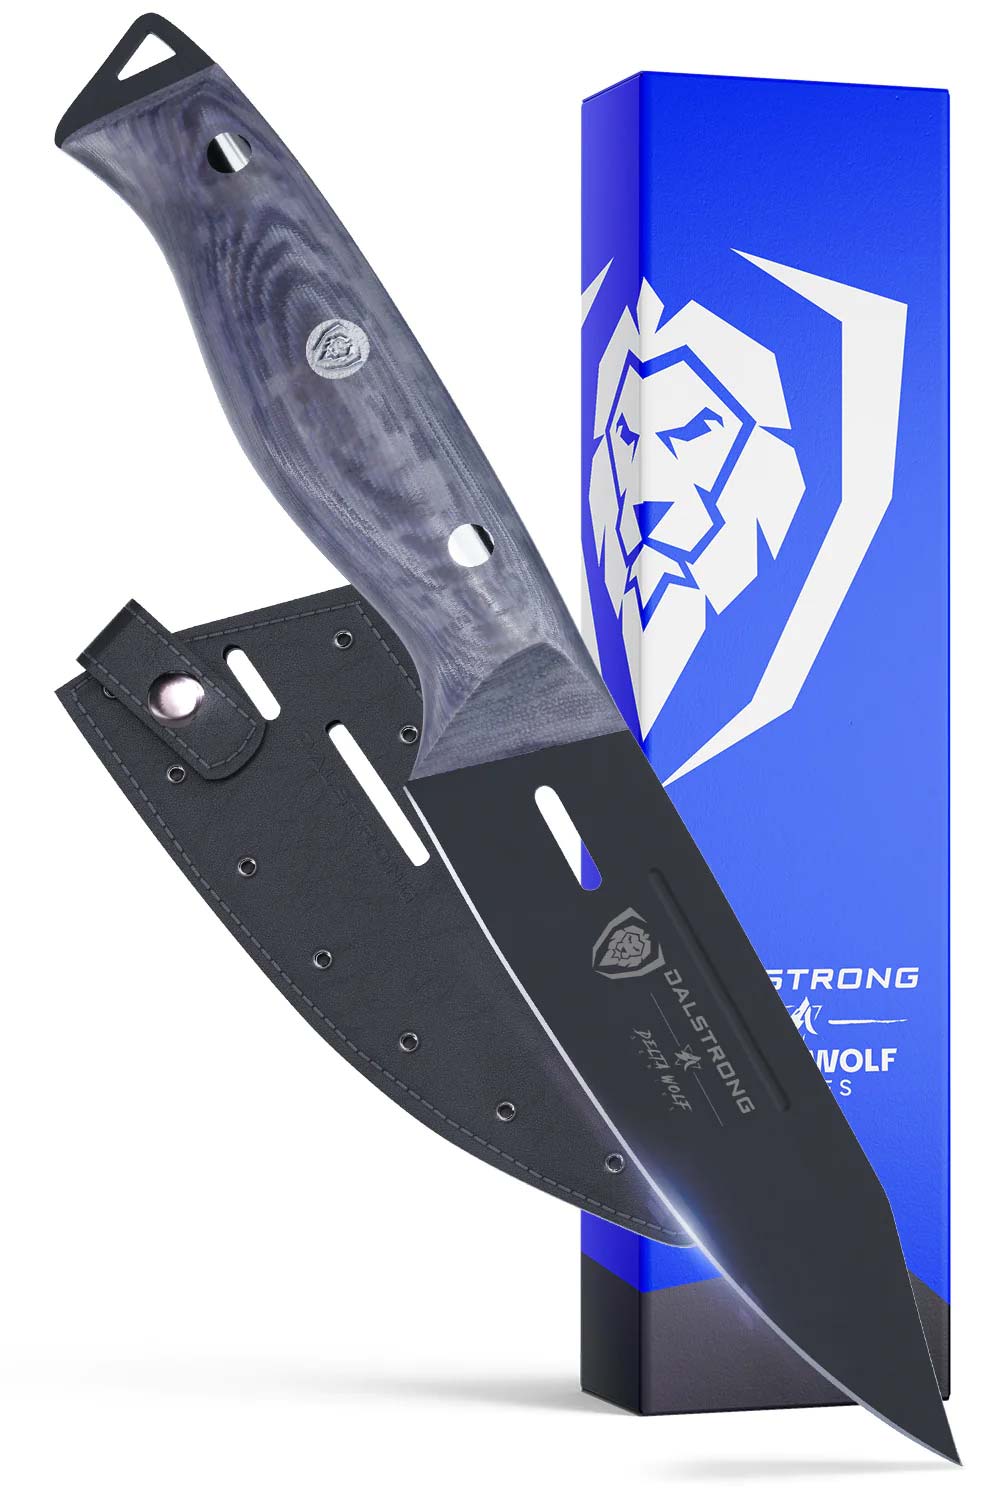 Dalstrong delta wolf series 4 inch paring knife in front of it's premium packaging.